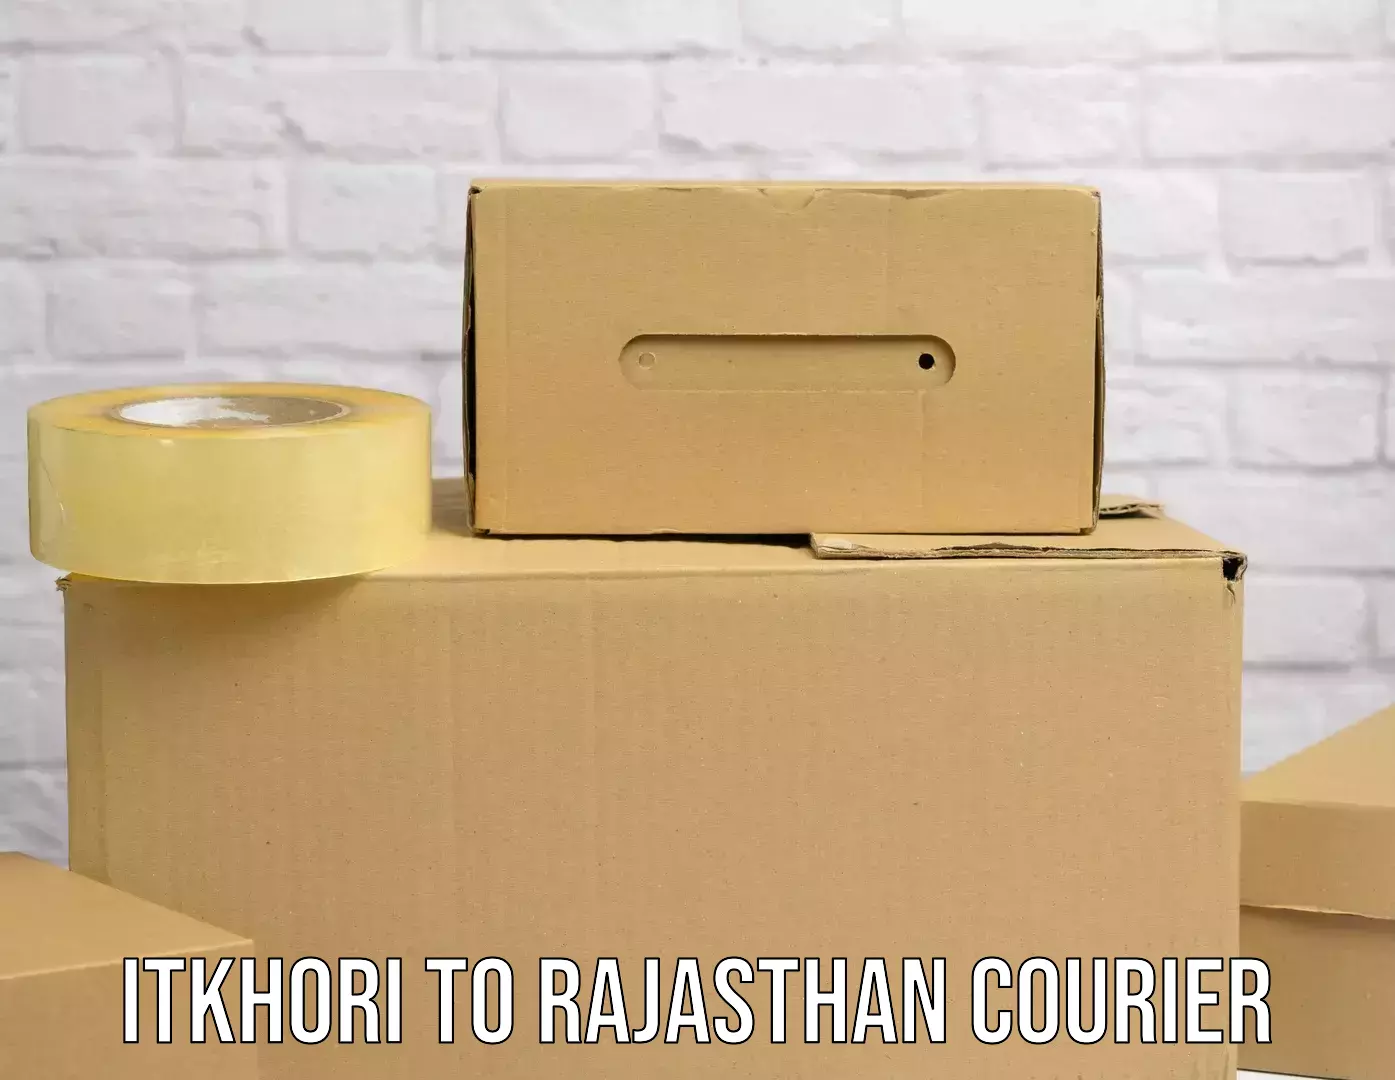 Reliable shipping partners Itkhori to Rajasthan